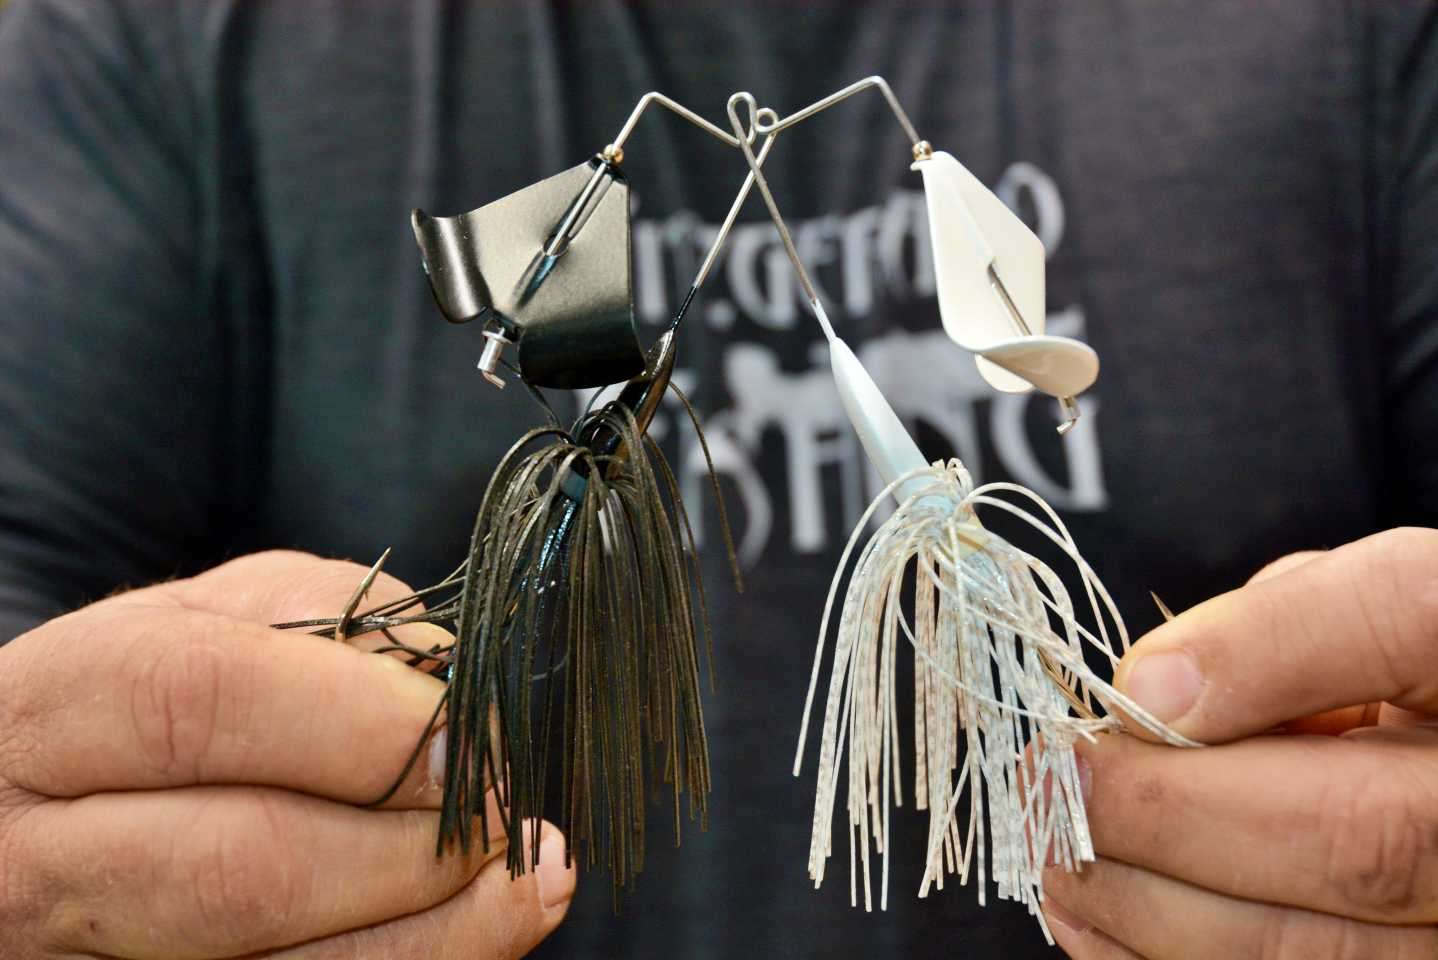 Gross opts for Boogerman Buzzbaits for the signature keeled head shape and premium buzz blade, which creates a noisy clacking sound by forcing the blade to make contact with the head on every rotation. The wire arm can be bent slightly upward for a softer action with highly pressured or wary bass.  